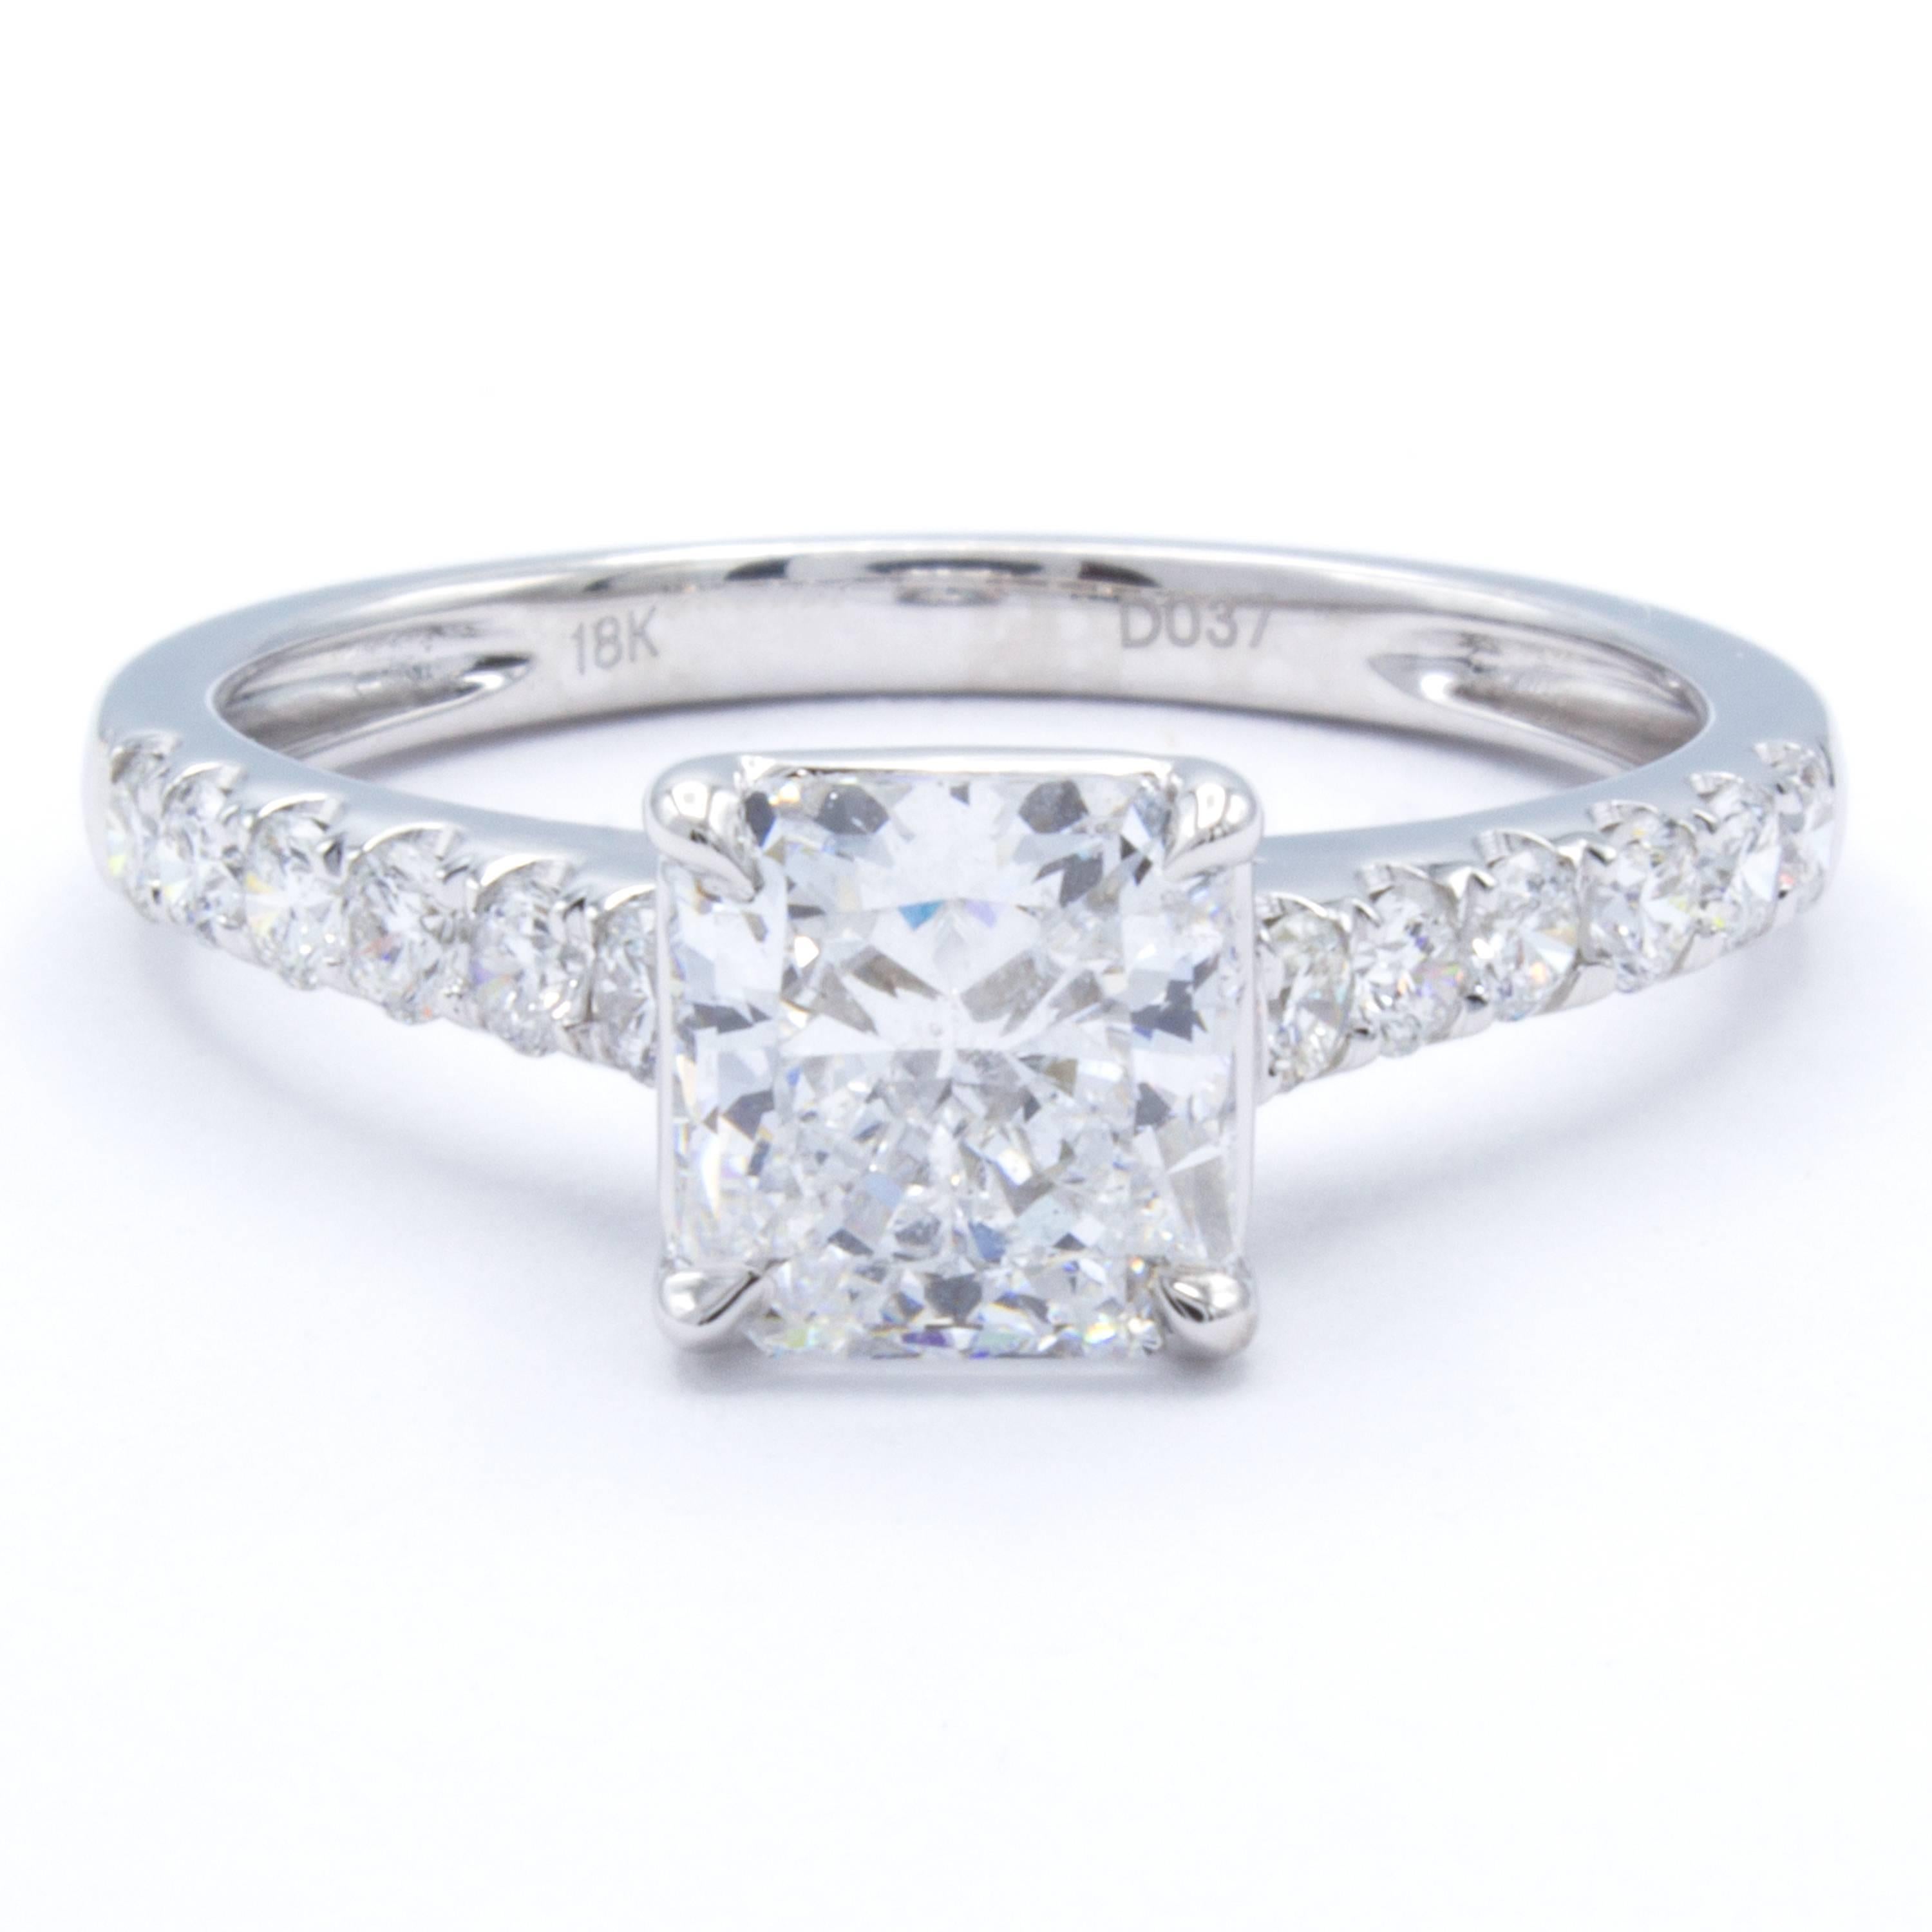 An elegant classic shows in this Rosenberg Diamonds & Co. engagement ring. A GIA certified 1.21 carat radiant cut diamond shines brilliantly within a cradle of round brilliant pave set diamonds on a band of bright 18Kt white gold. Designed by David